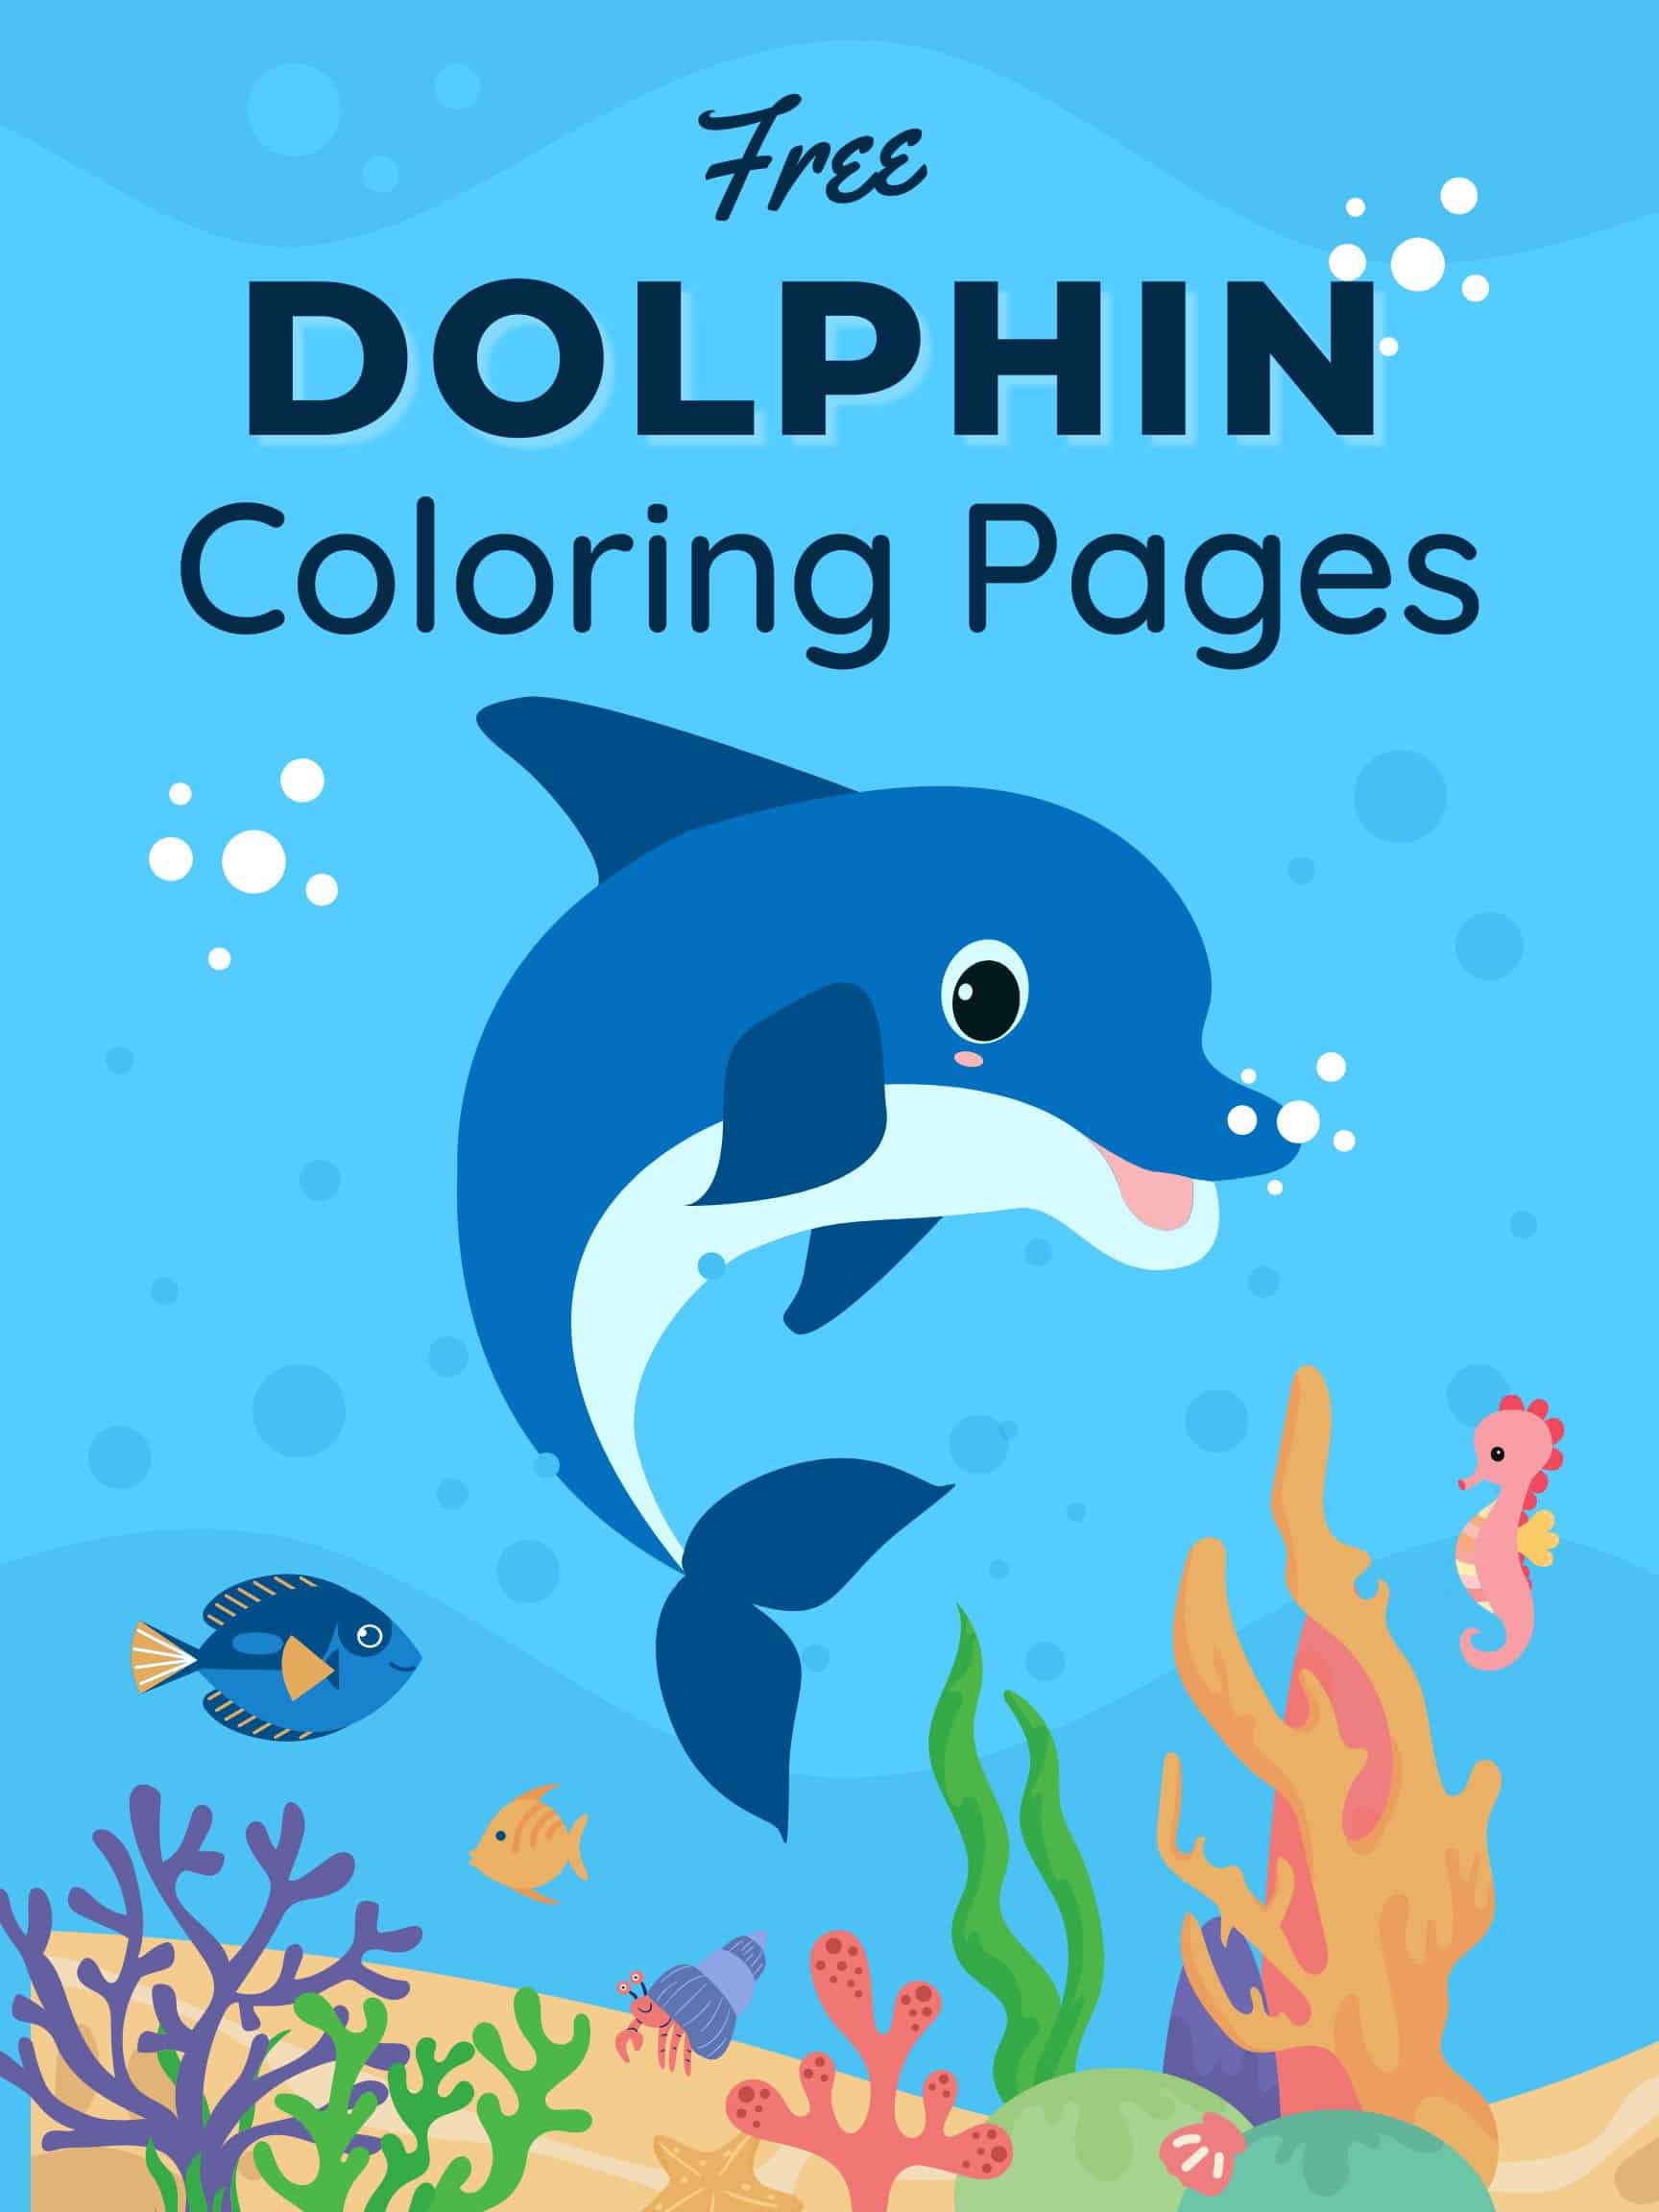 33 Free Dolphin Coloring Pages | PDF Printable | All Ages